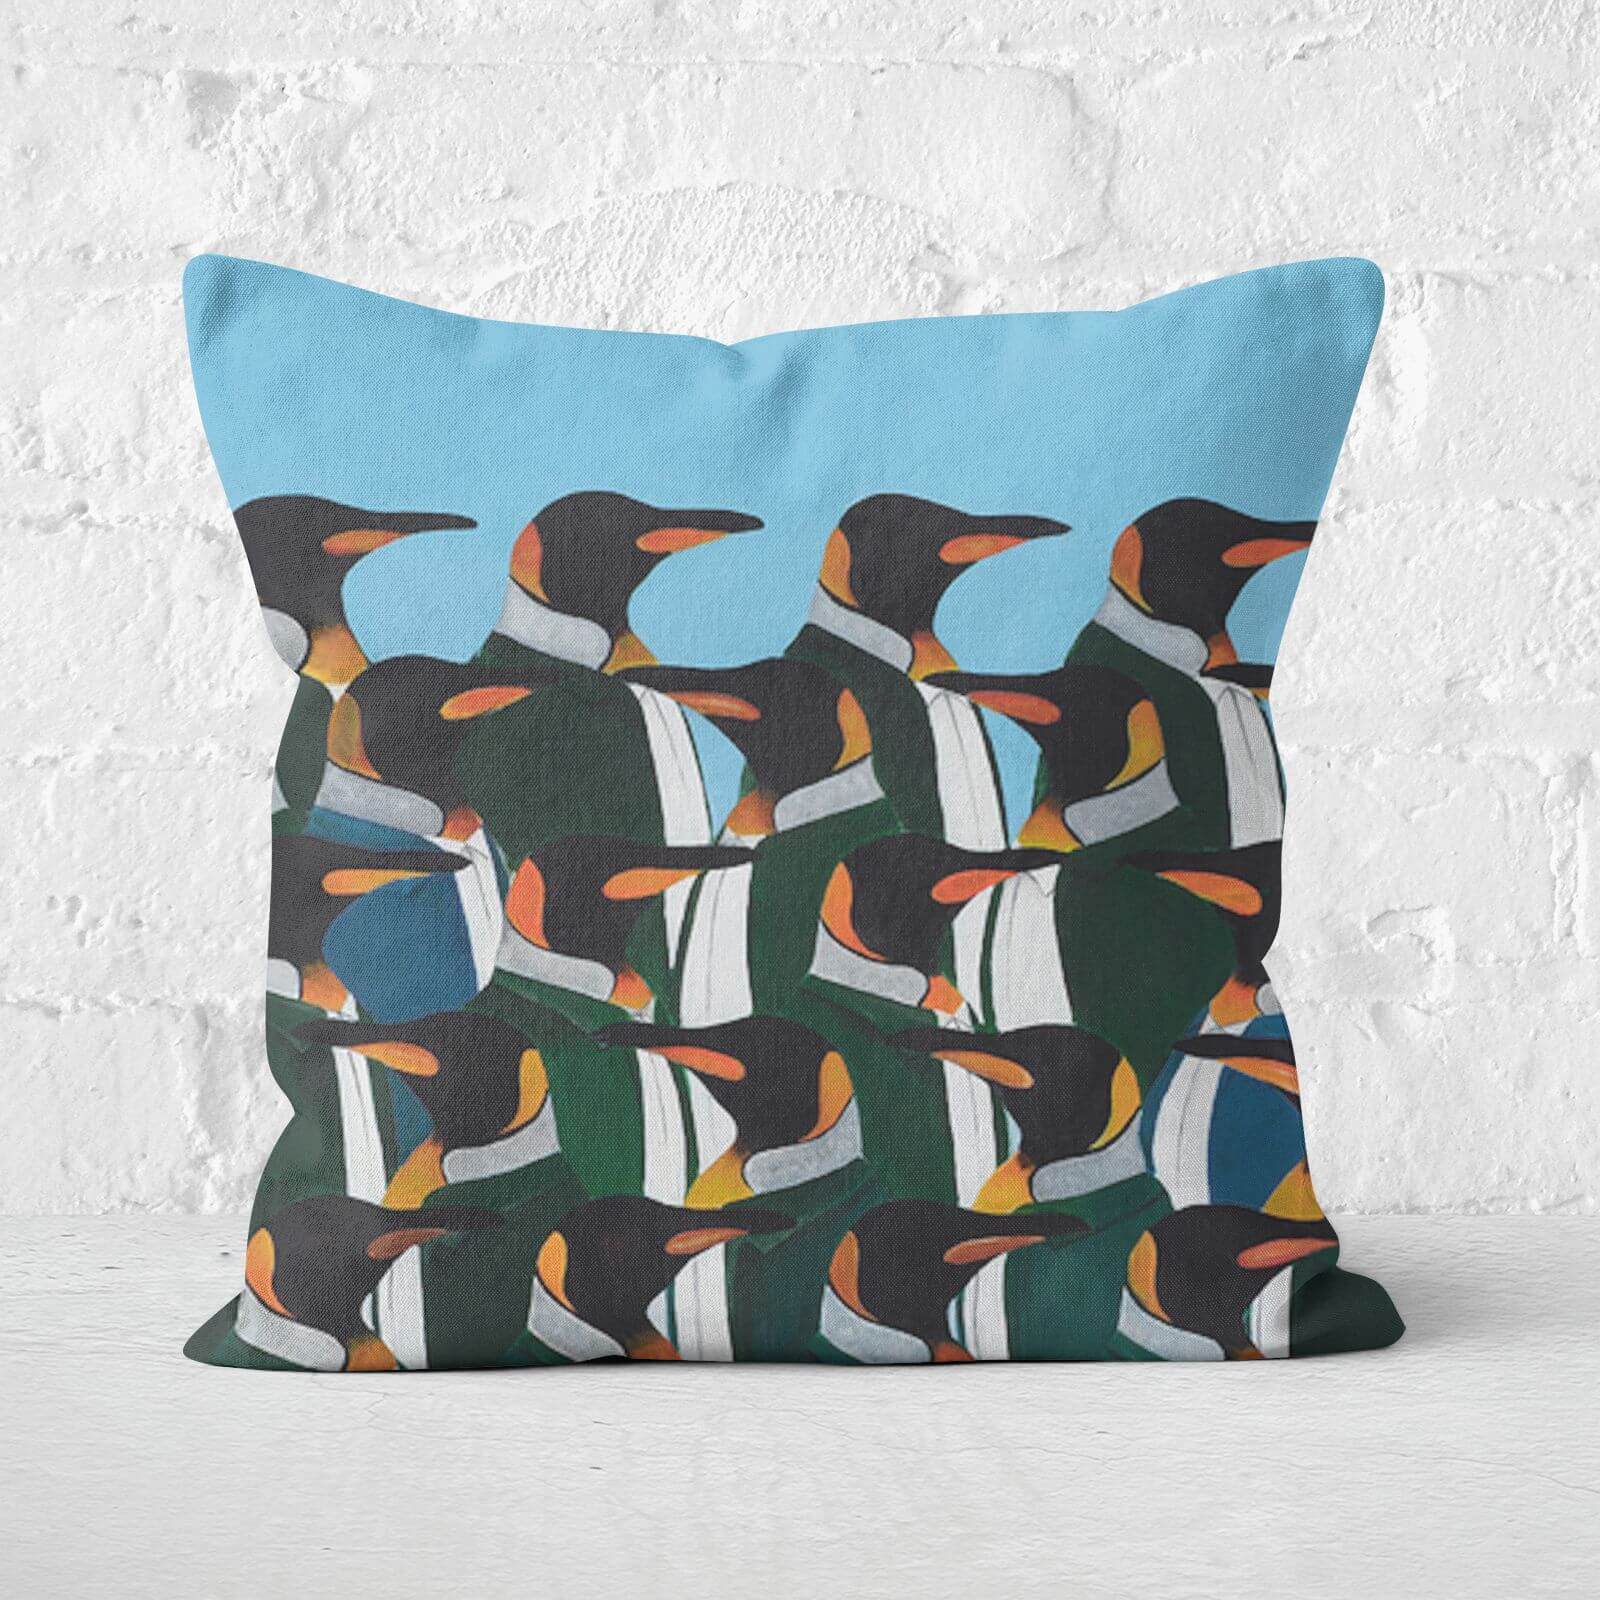 Penguins In Suits Square Cushion - 40x40cm - Soft Touch